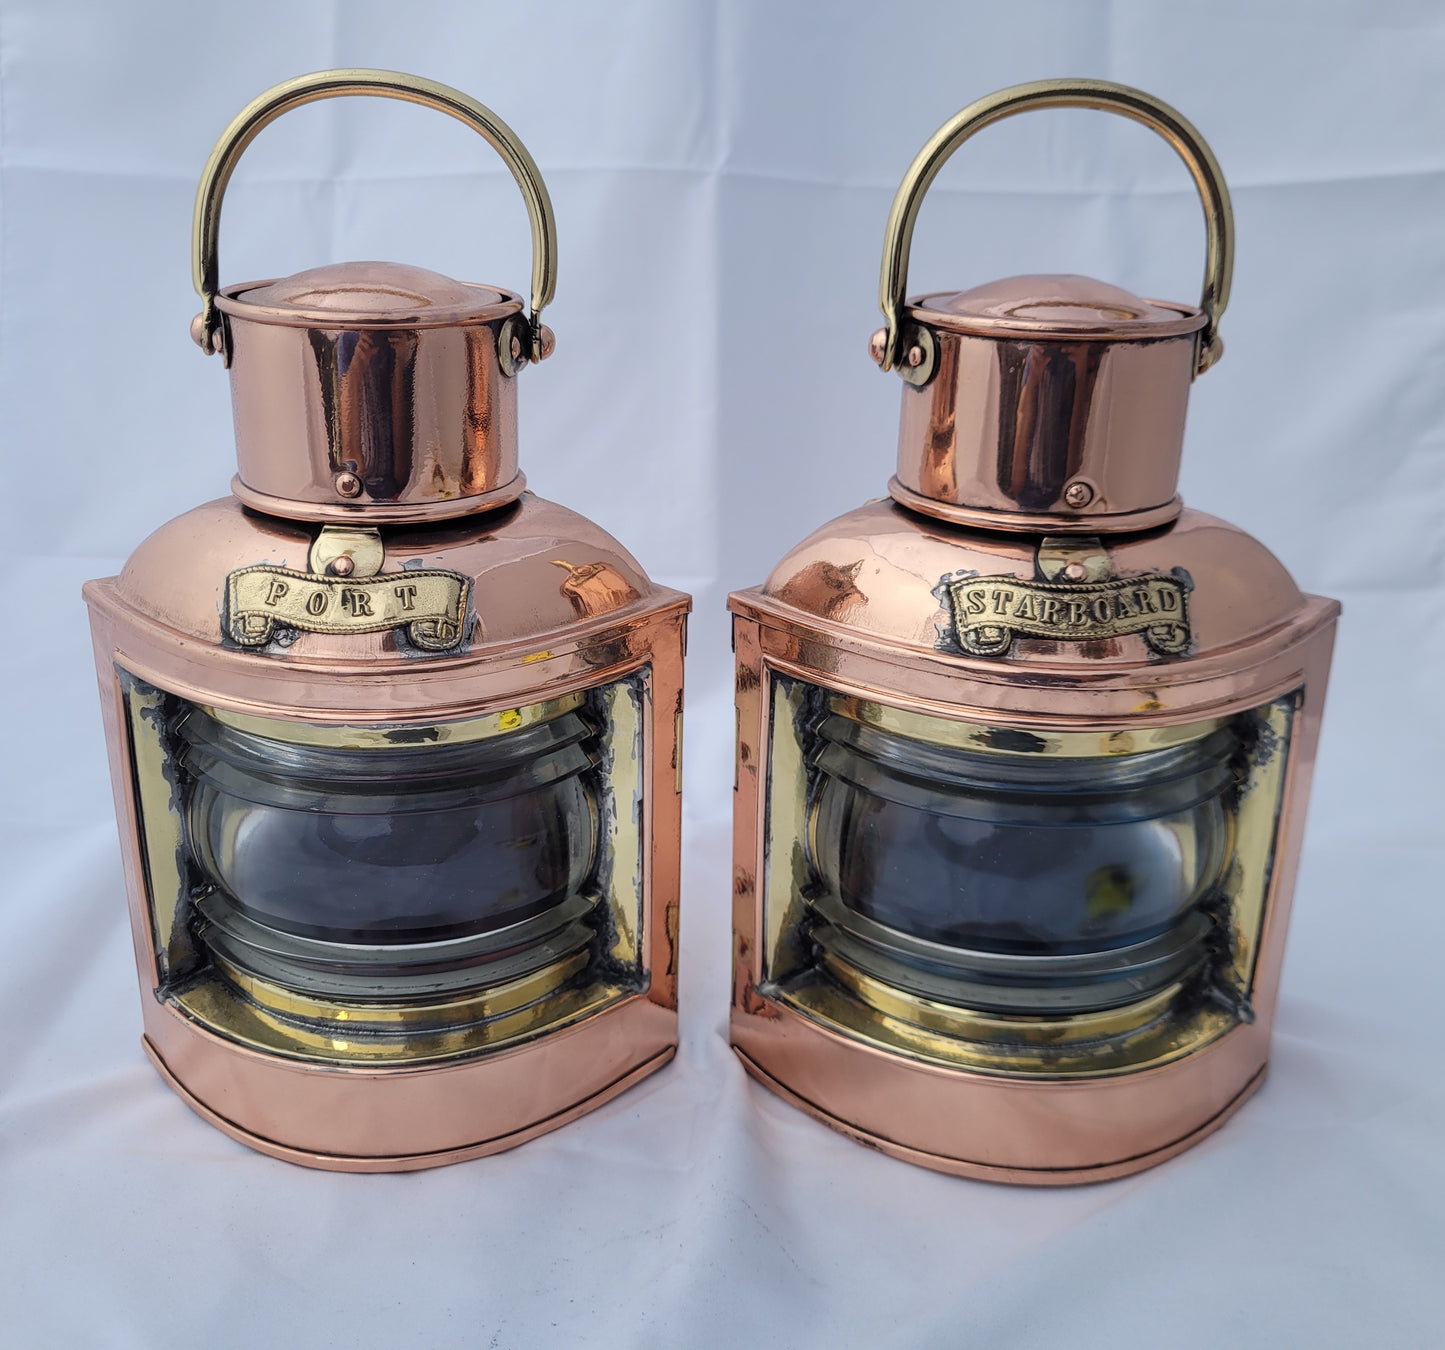 Port and Starboard Ship Lanterns